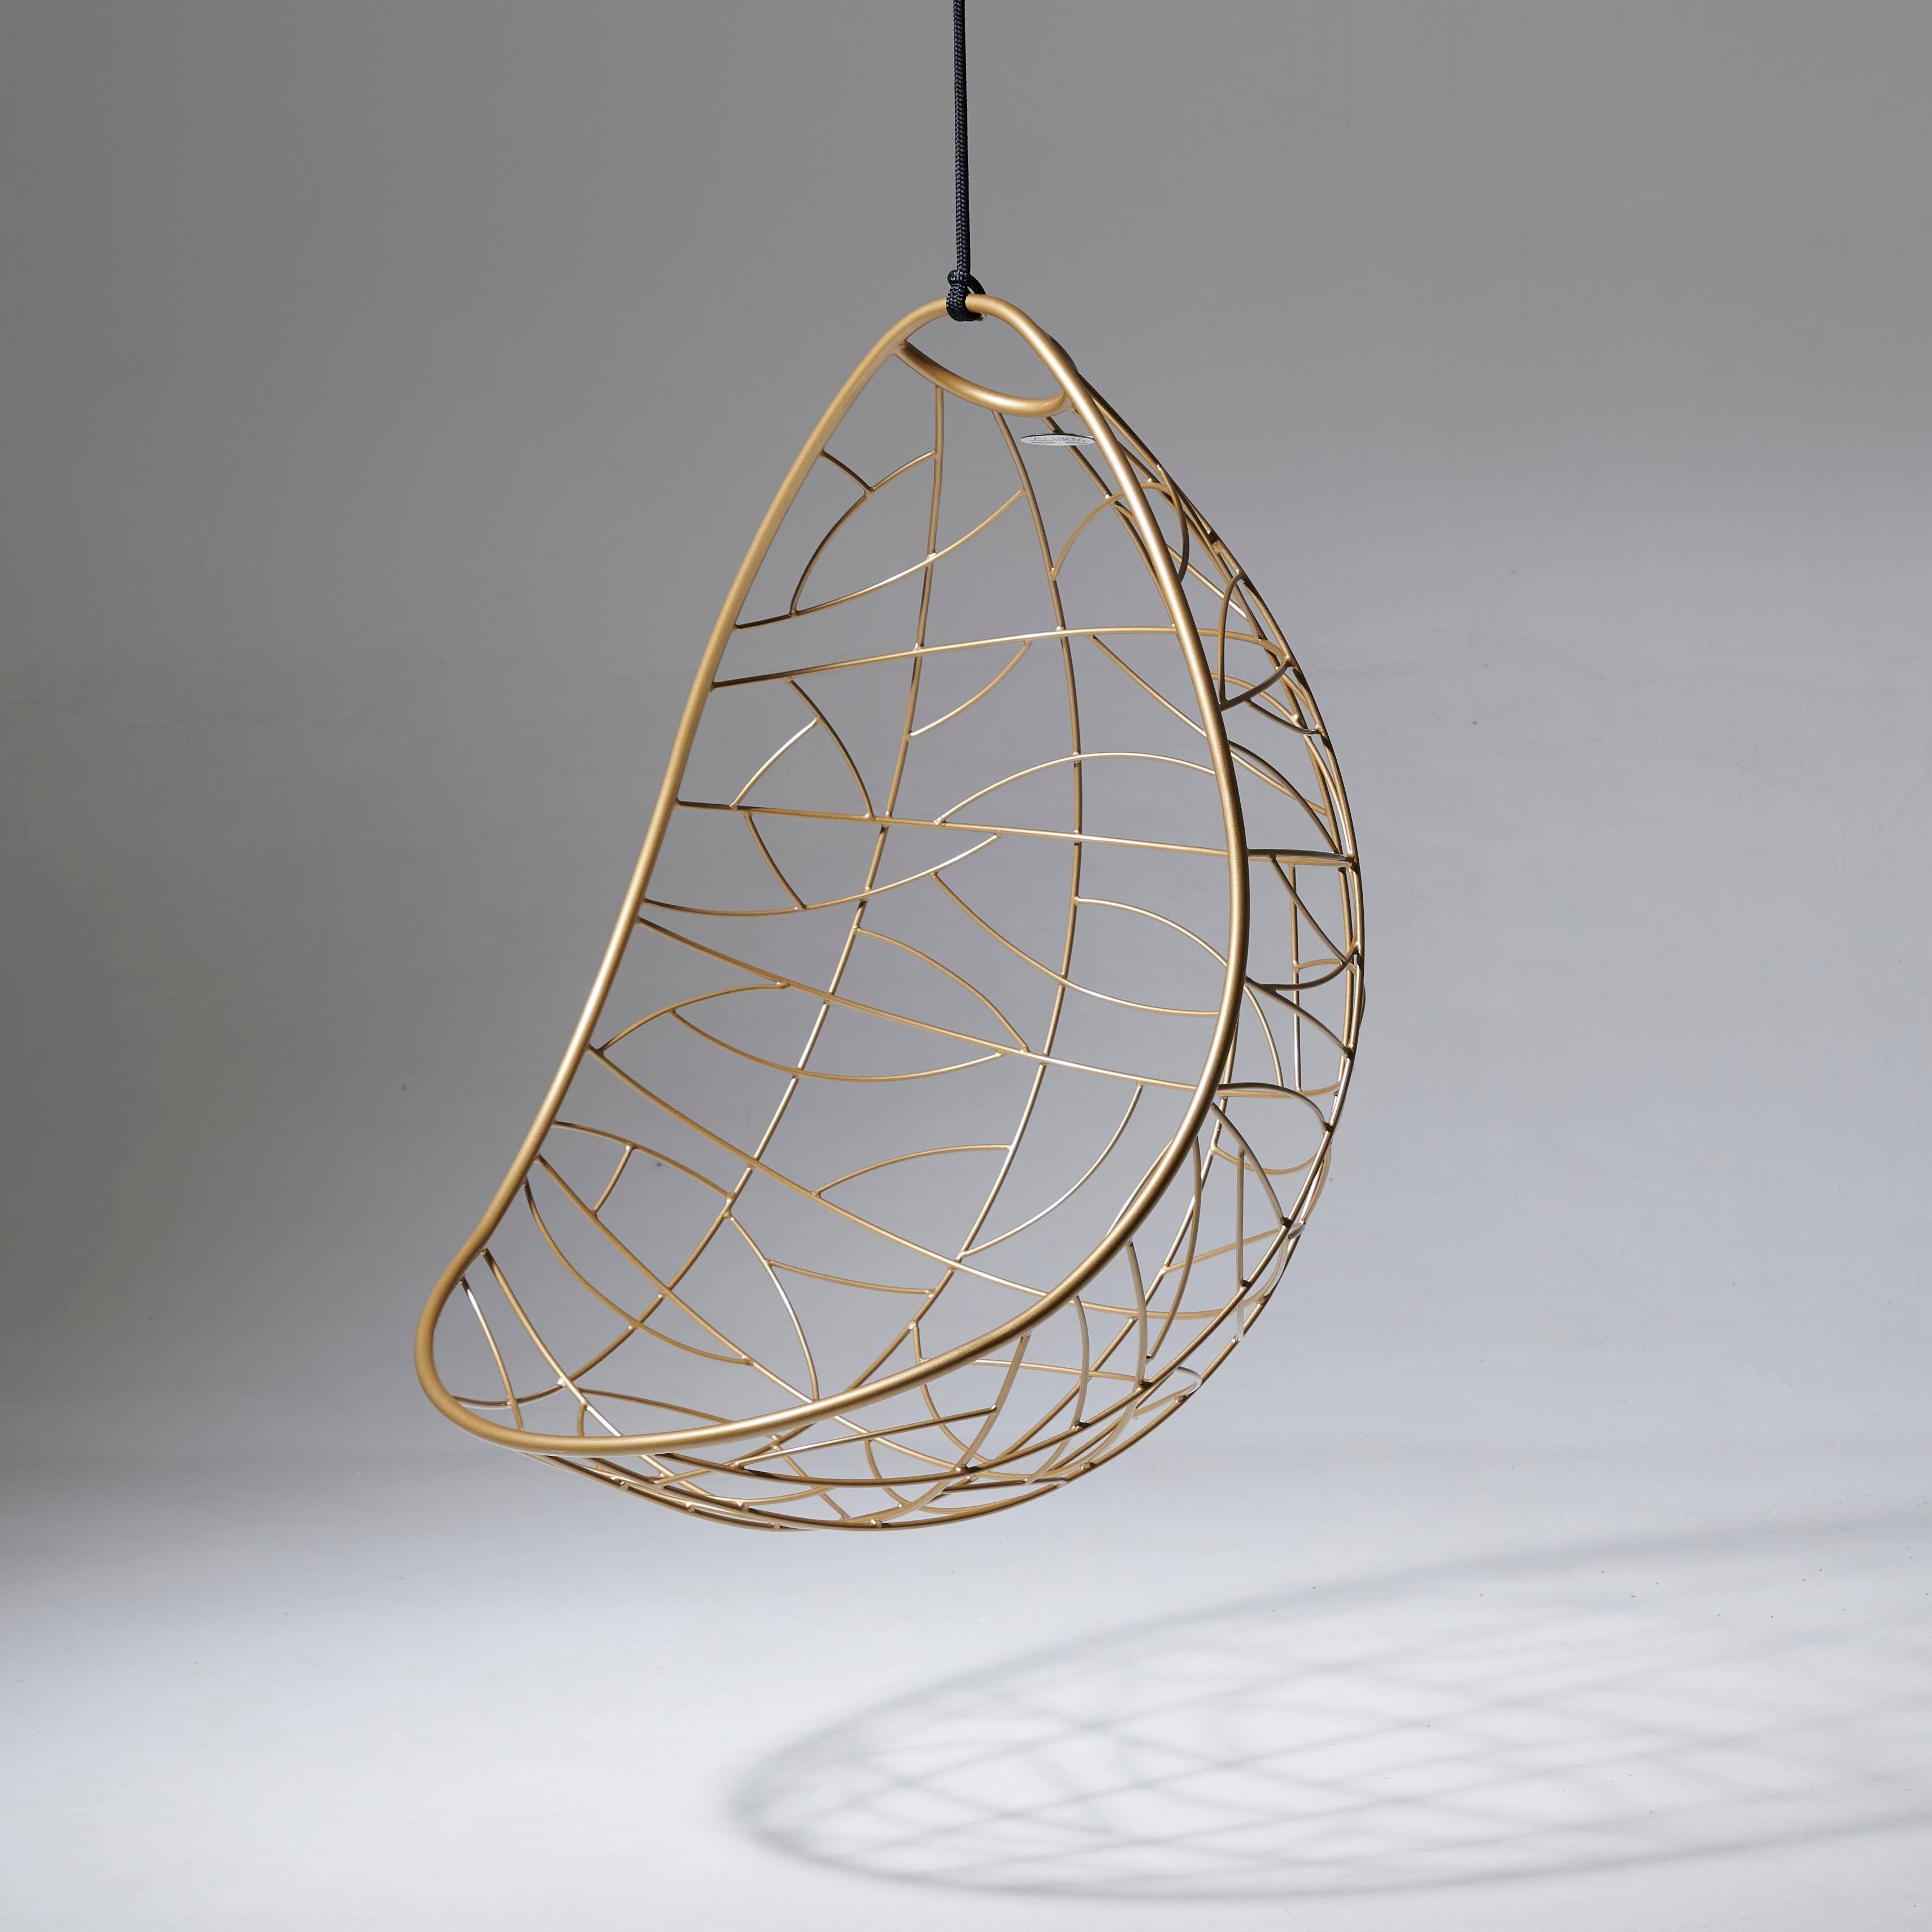 The Nest Egg hanging chair swing seat is inspired from the organic forms in birds' nests and has a natural egg shape. The chair has been designed to be extremely comfortable and has a cozy cocoon-like feel. It will embrace your body with its